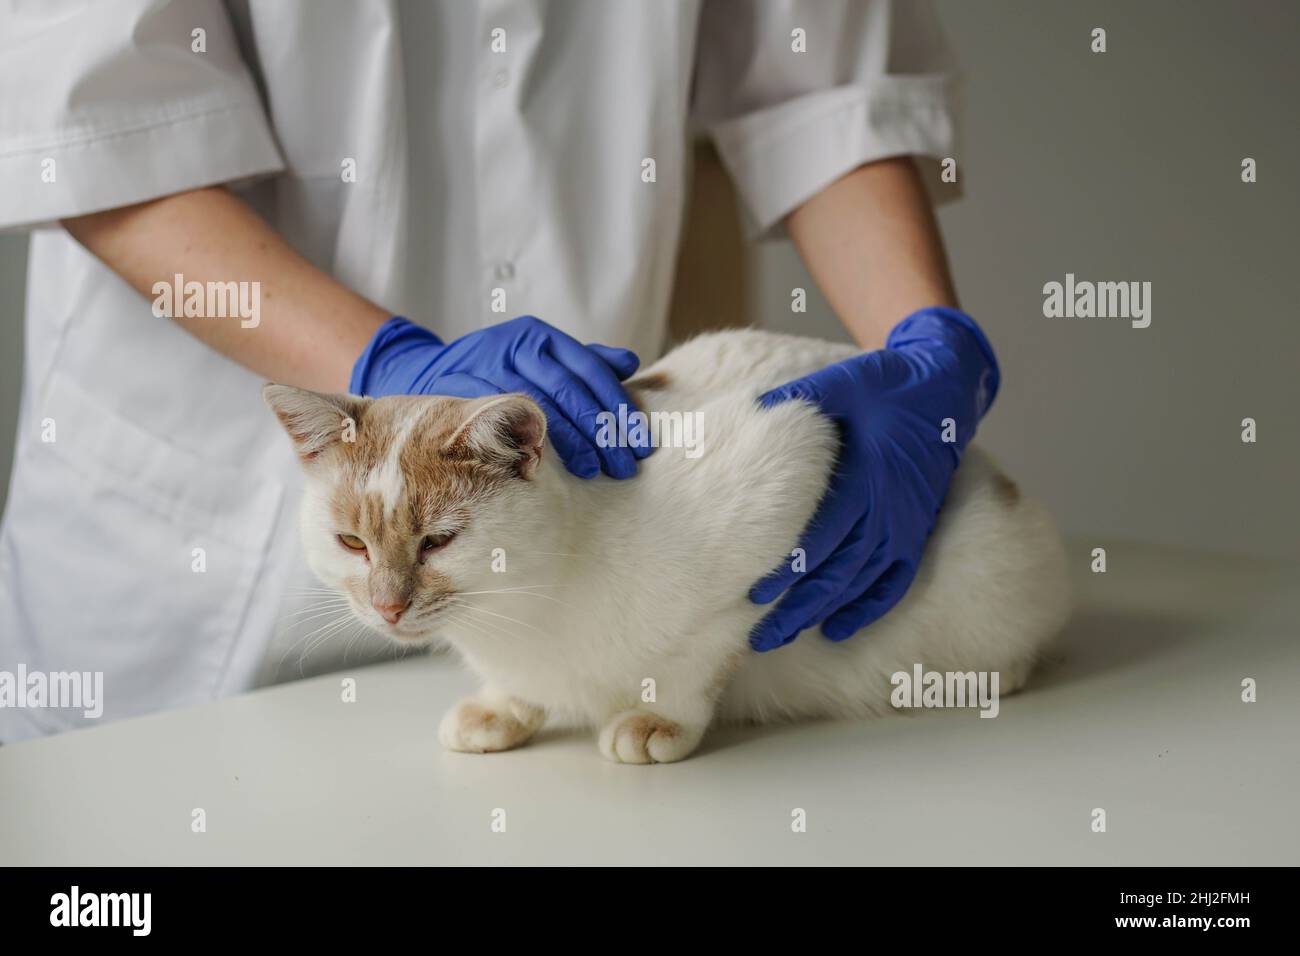 Woman veterinarian in blue protective gloves examining cat. Cat visiting vet for regular check up. Stock Photo